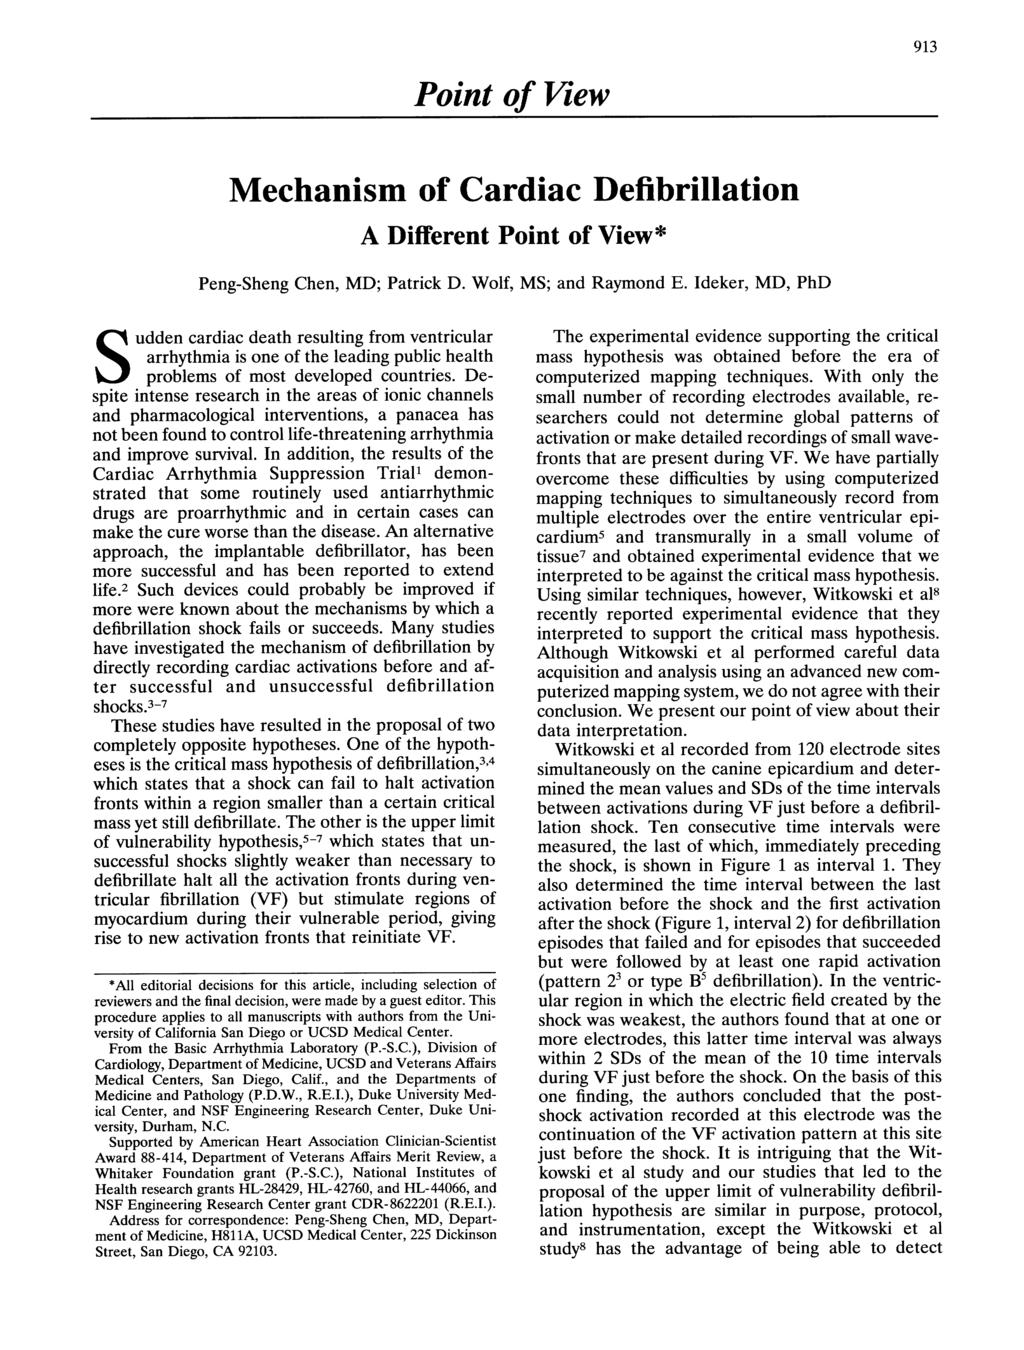 Point of View 913 Mechanism of Cardiac Defibrillation A Different Point of View* Peng-Sheng Chen, MD; Patrick D. Wolf, MS; and Raymond E. Ideker, MD, PhD Downloaded from http://ahajournals.